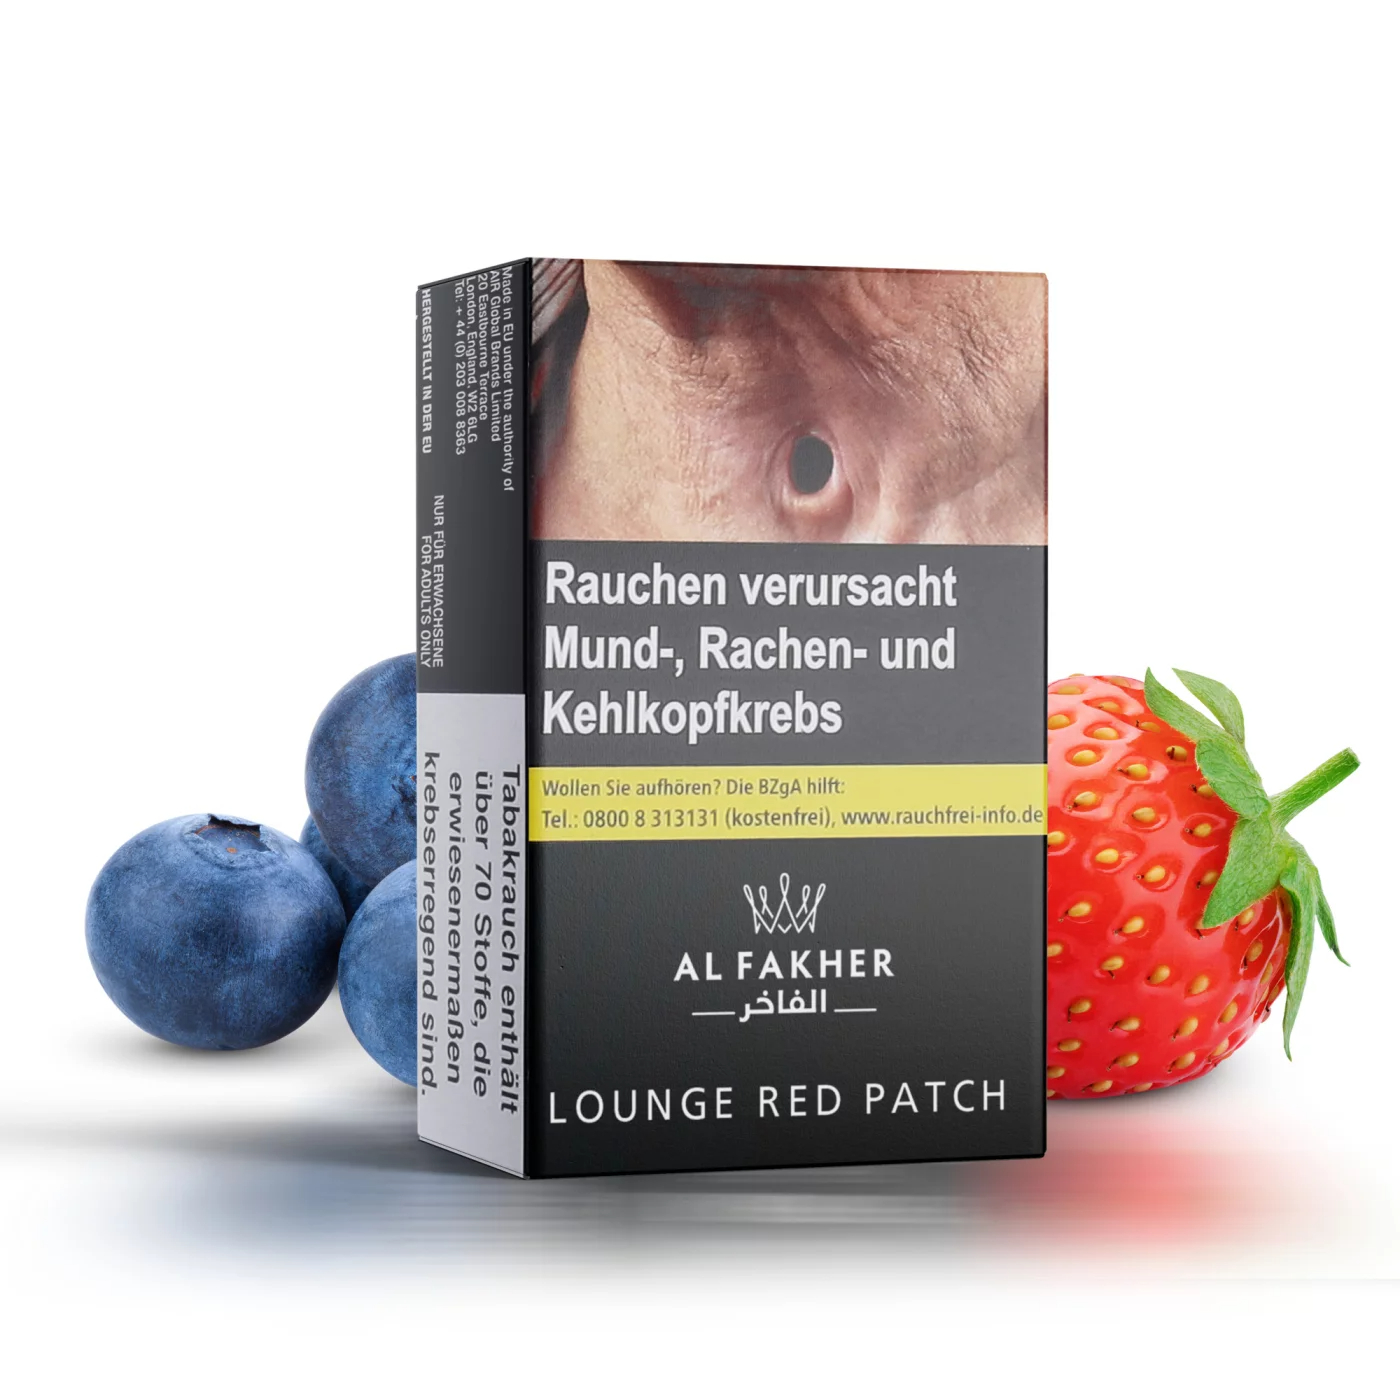 Al Fakher Tabak - Lounge Red Patch 20g